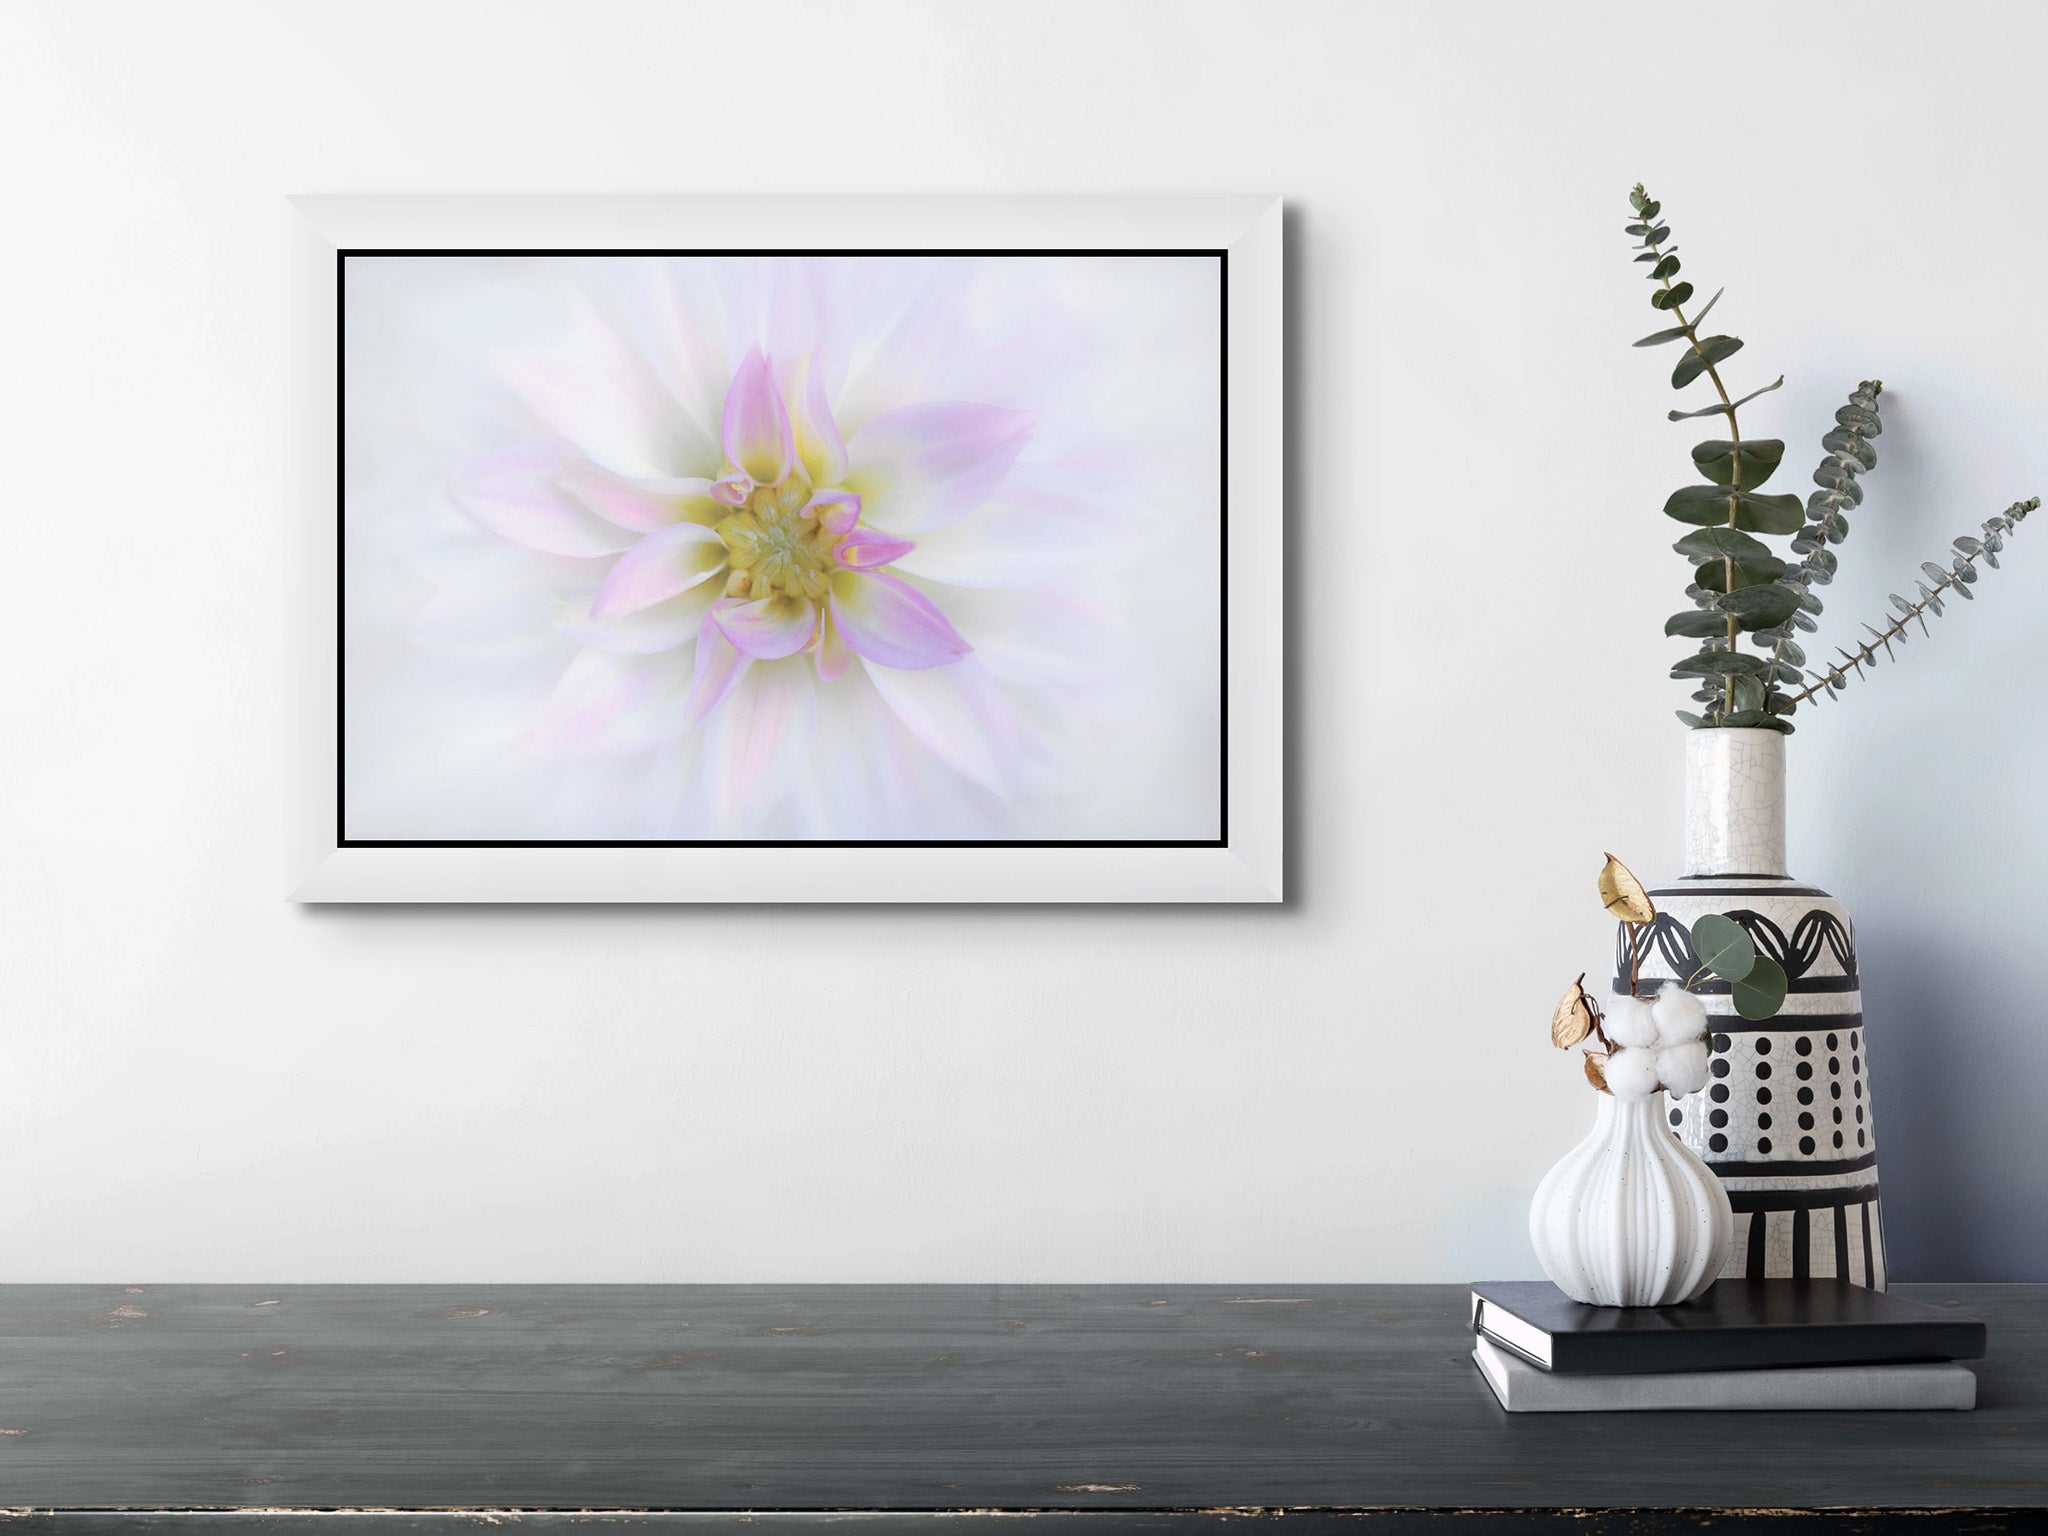 Flower photograph of white dahlia by Cameron Dreaux hanging on the wall of a room. 